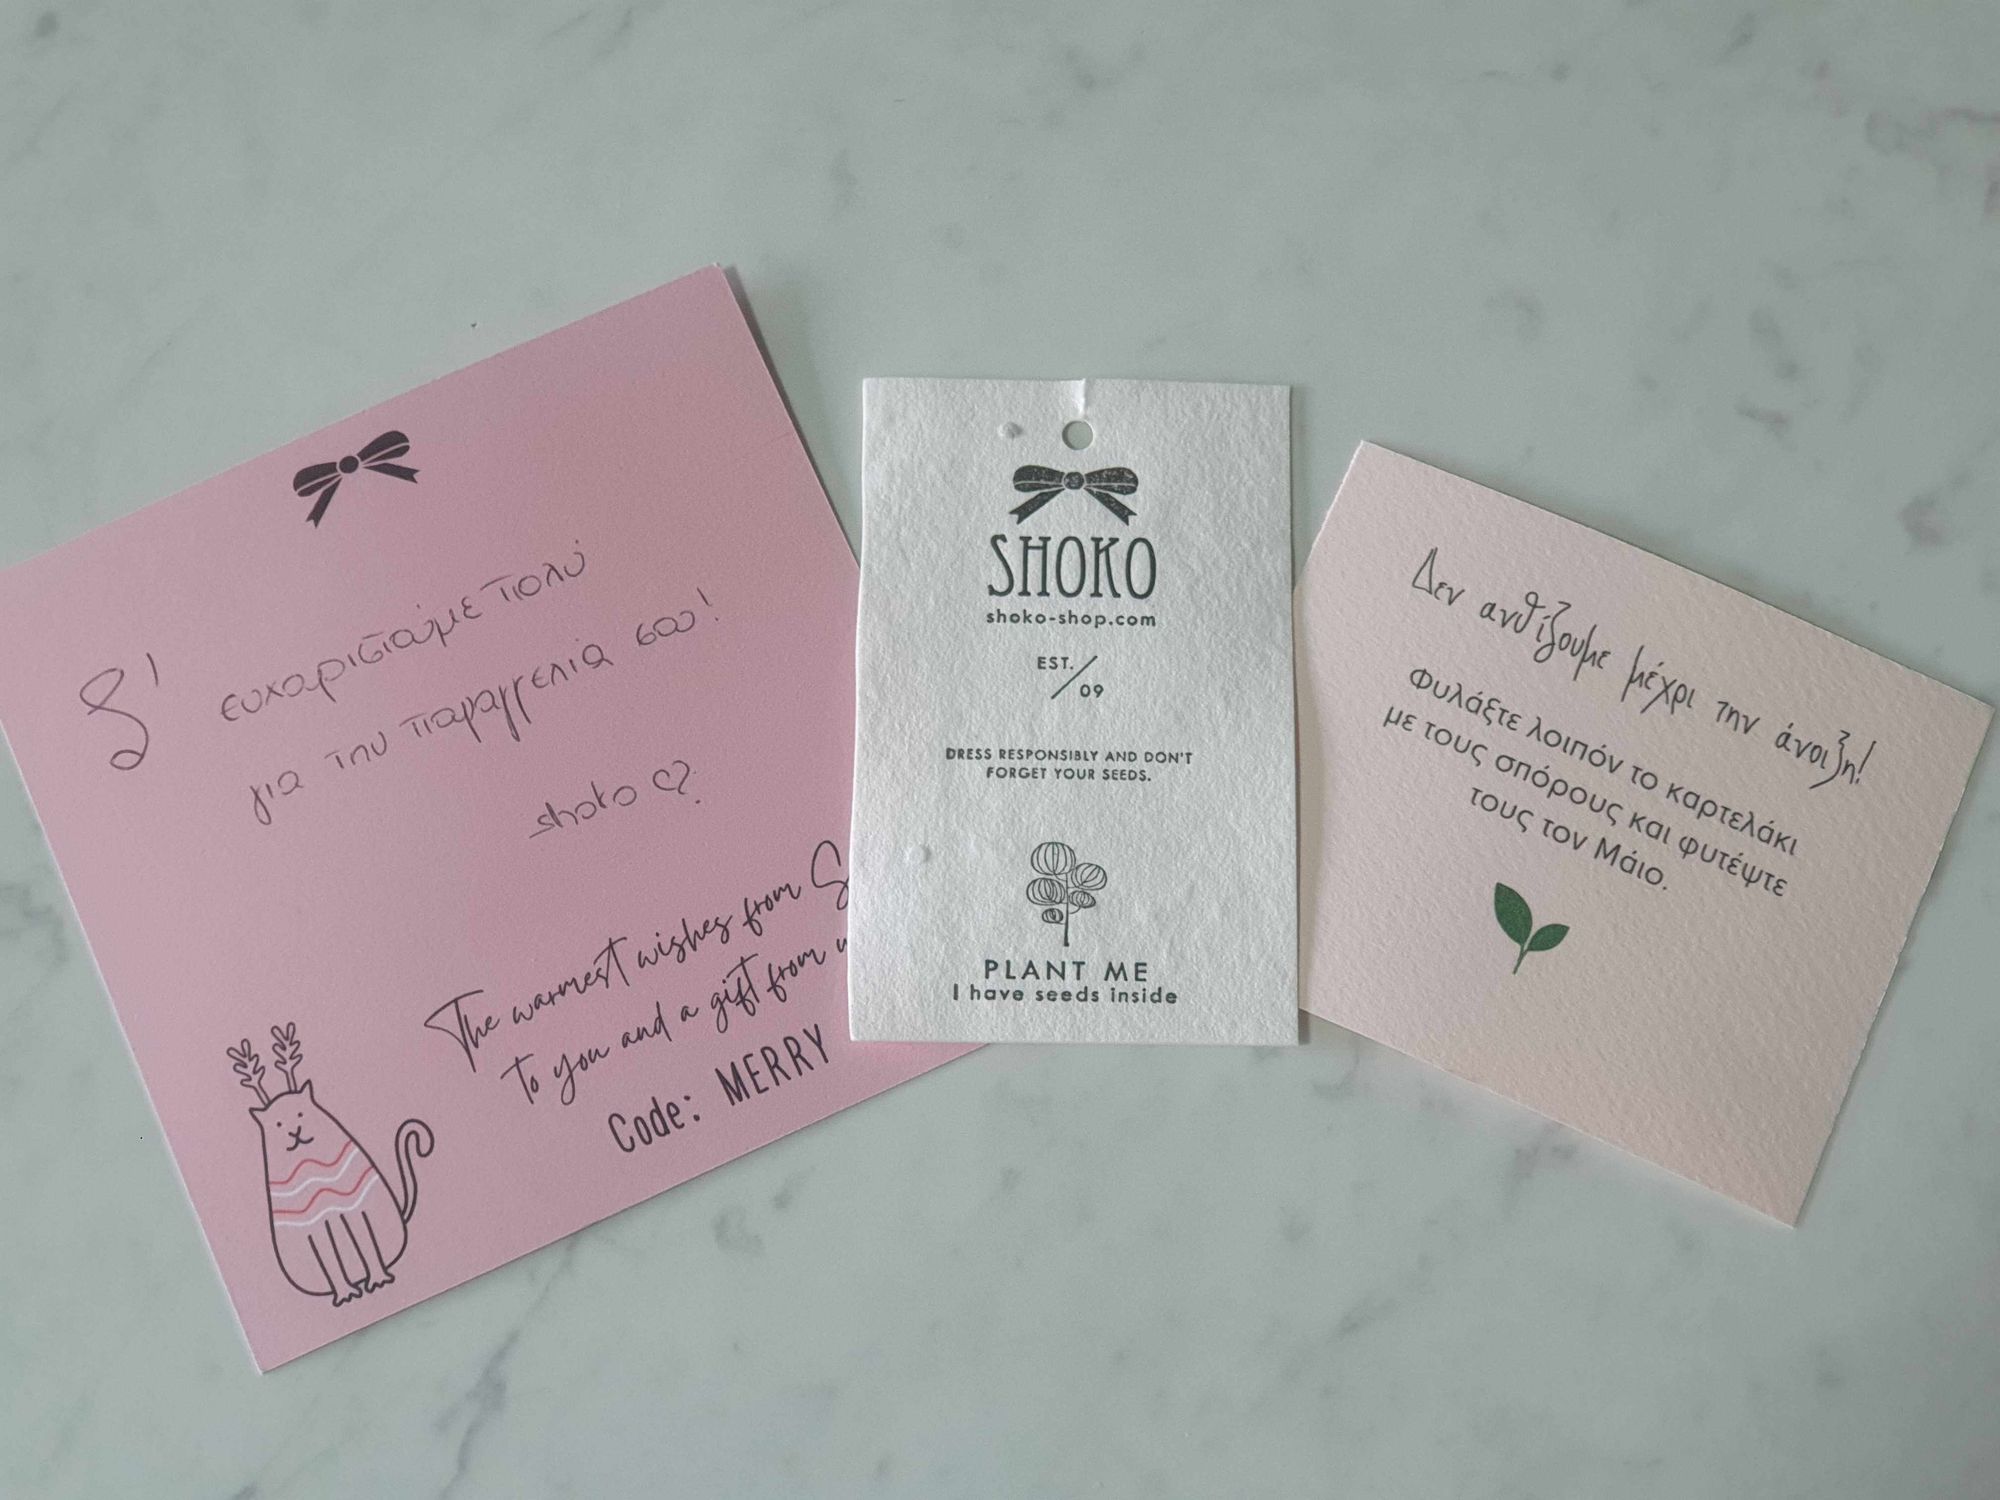 Sustainable brands–An image of three notes from Shoko that were included in an order. They are on pink and white branded pieces of paper with hand-written messages in Greek. The tag in the middle is white and has the Shoko logo couples with an image of a tree and the message: Plant Me. I have seeds inside. 